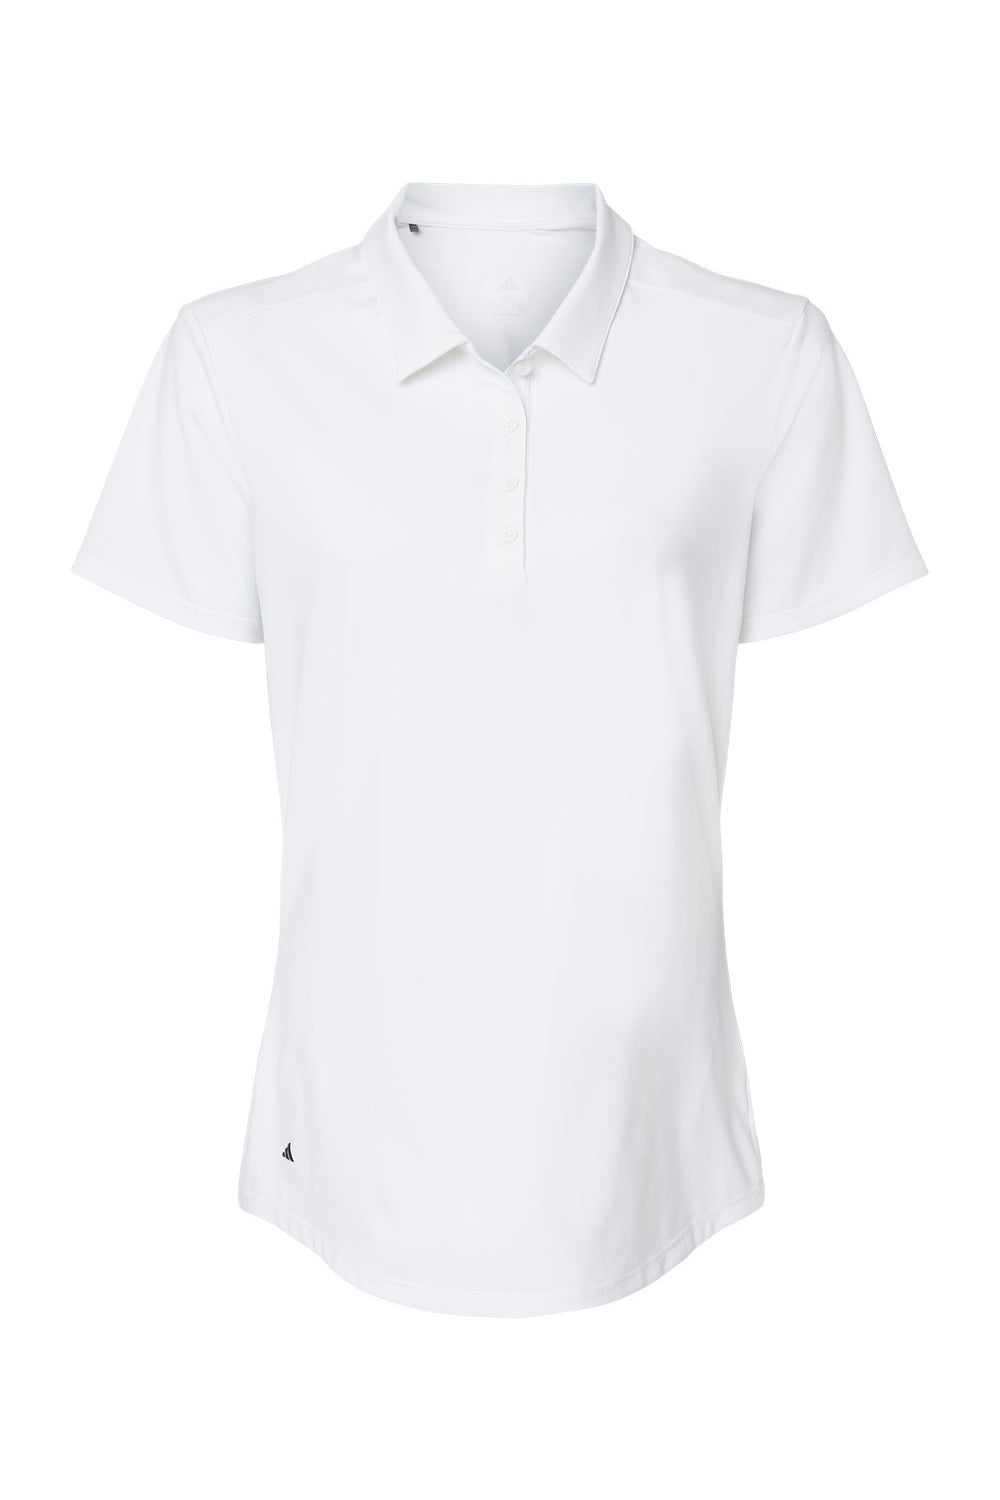 Adidas A515 Womens Ultimate Short Sleeve Polo Shirt White Flat Front